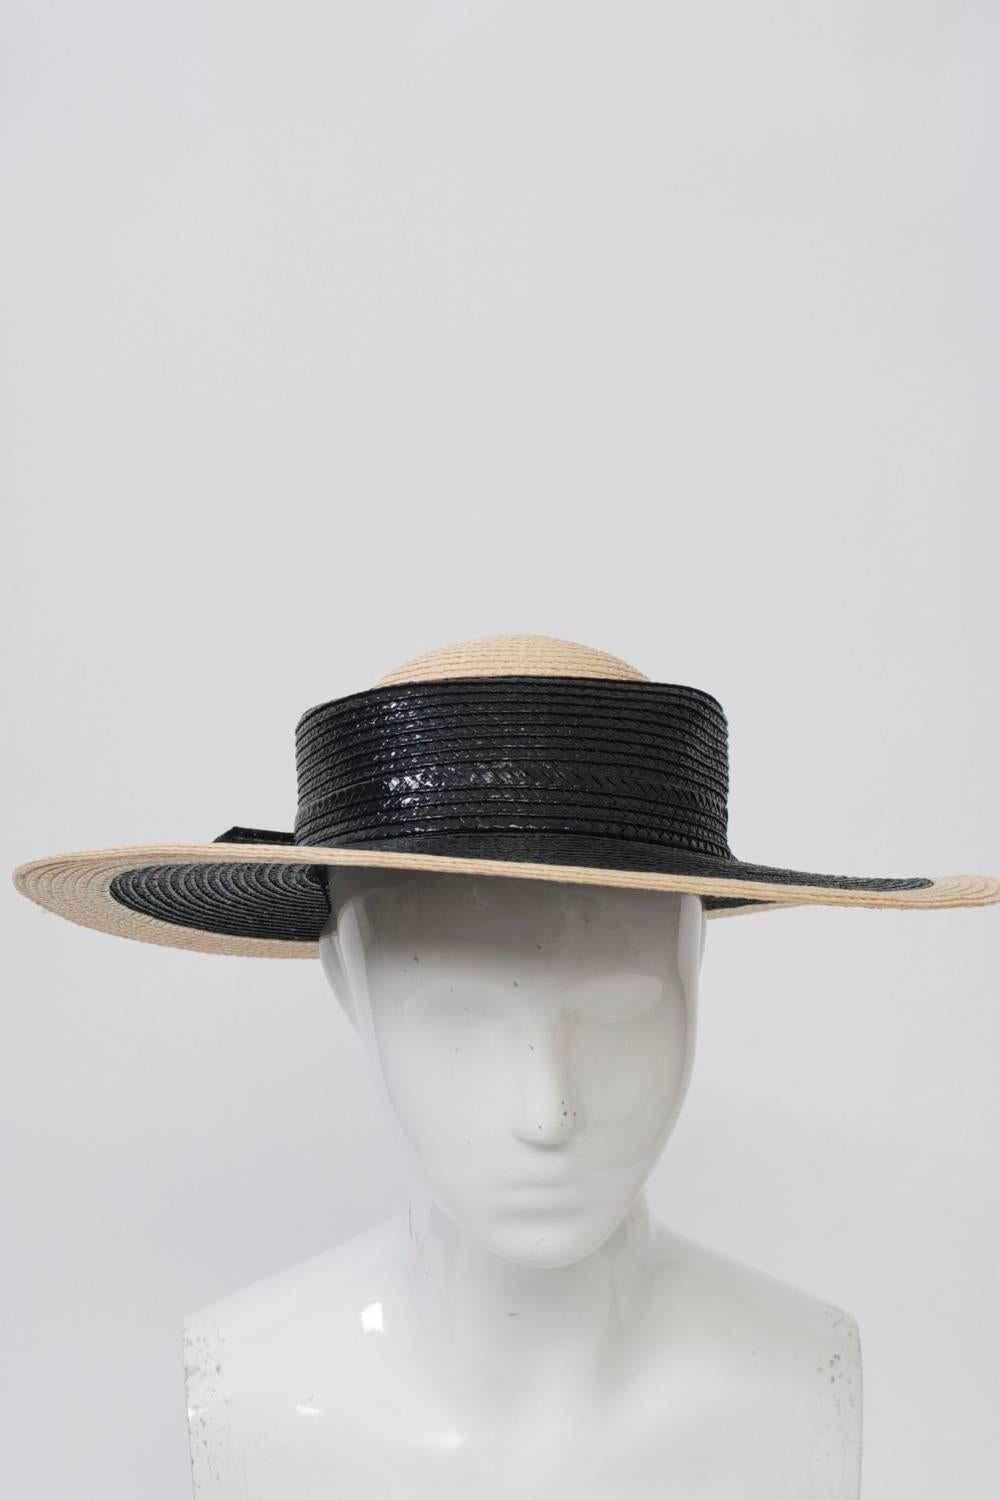 Striking straw hat by Mr. John with wide brim, the crown and outer brim in natural straw, the rest in black, including a 